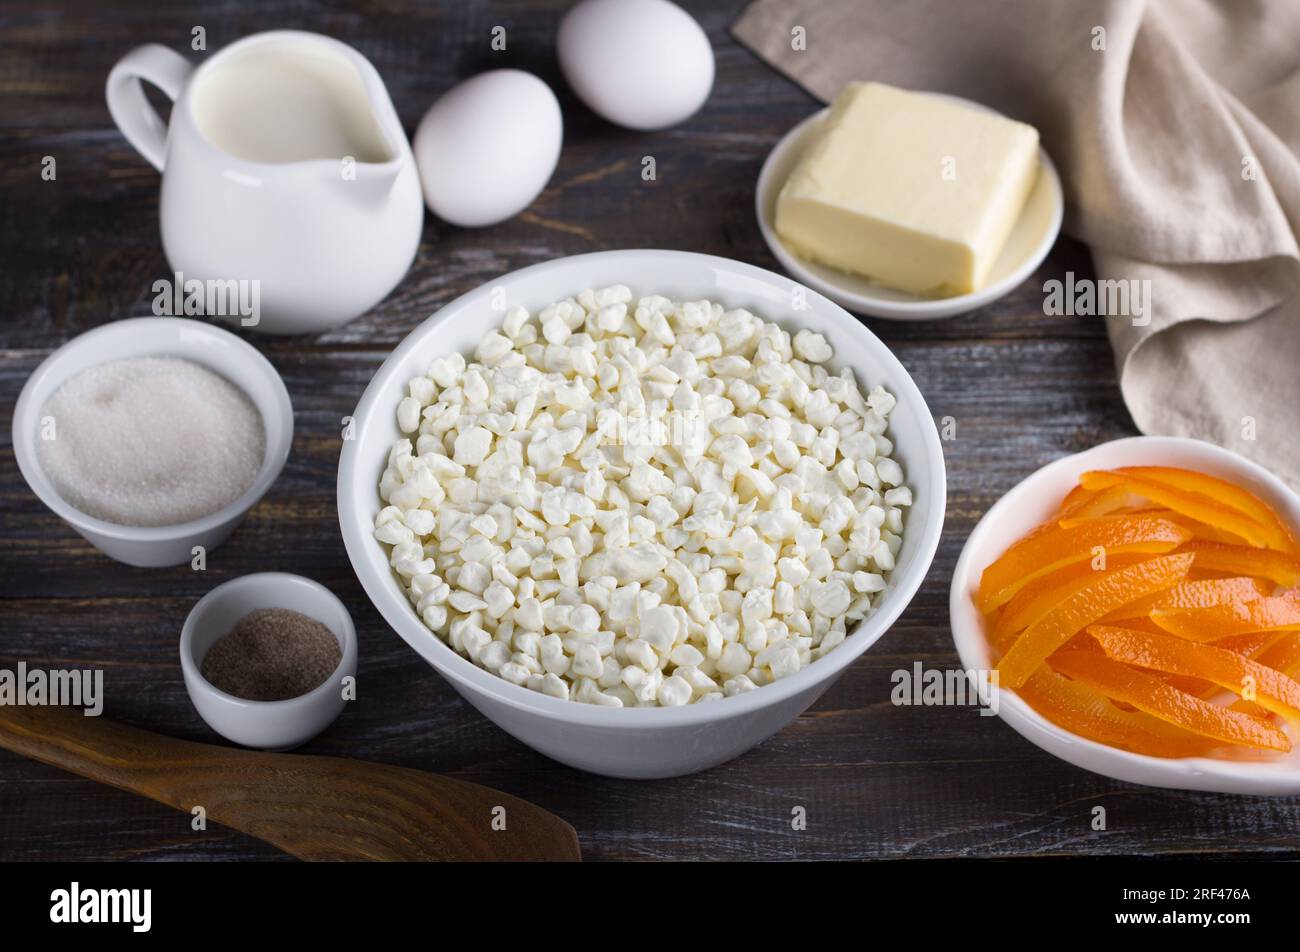 Bowl with cottage cheese, candied oranges, cream, eggs, butter, sugar, vanilla sugar on a wooden background. Ingredients for home baking. Stock Photo